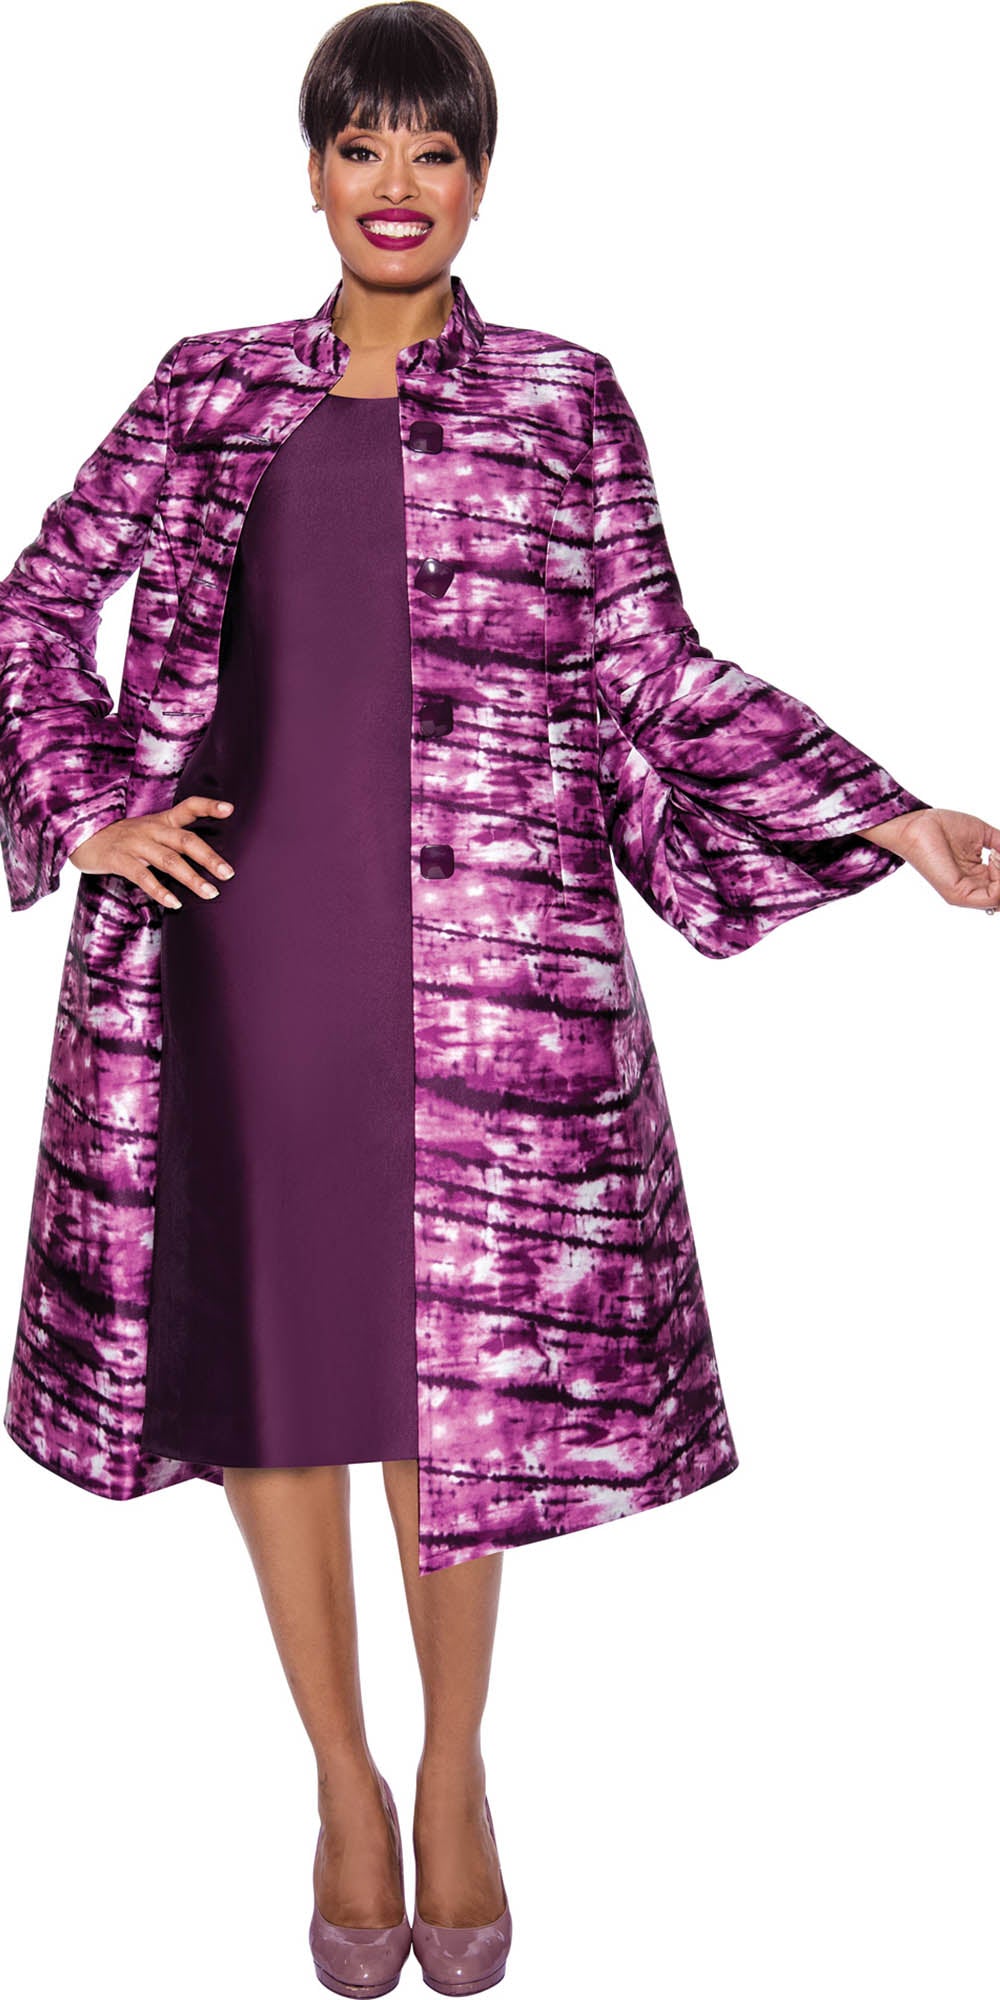 Dresses by Nubiano - 12222 - Purple Print 2pc Button Front Jacket Dress